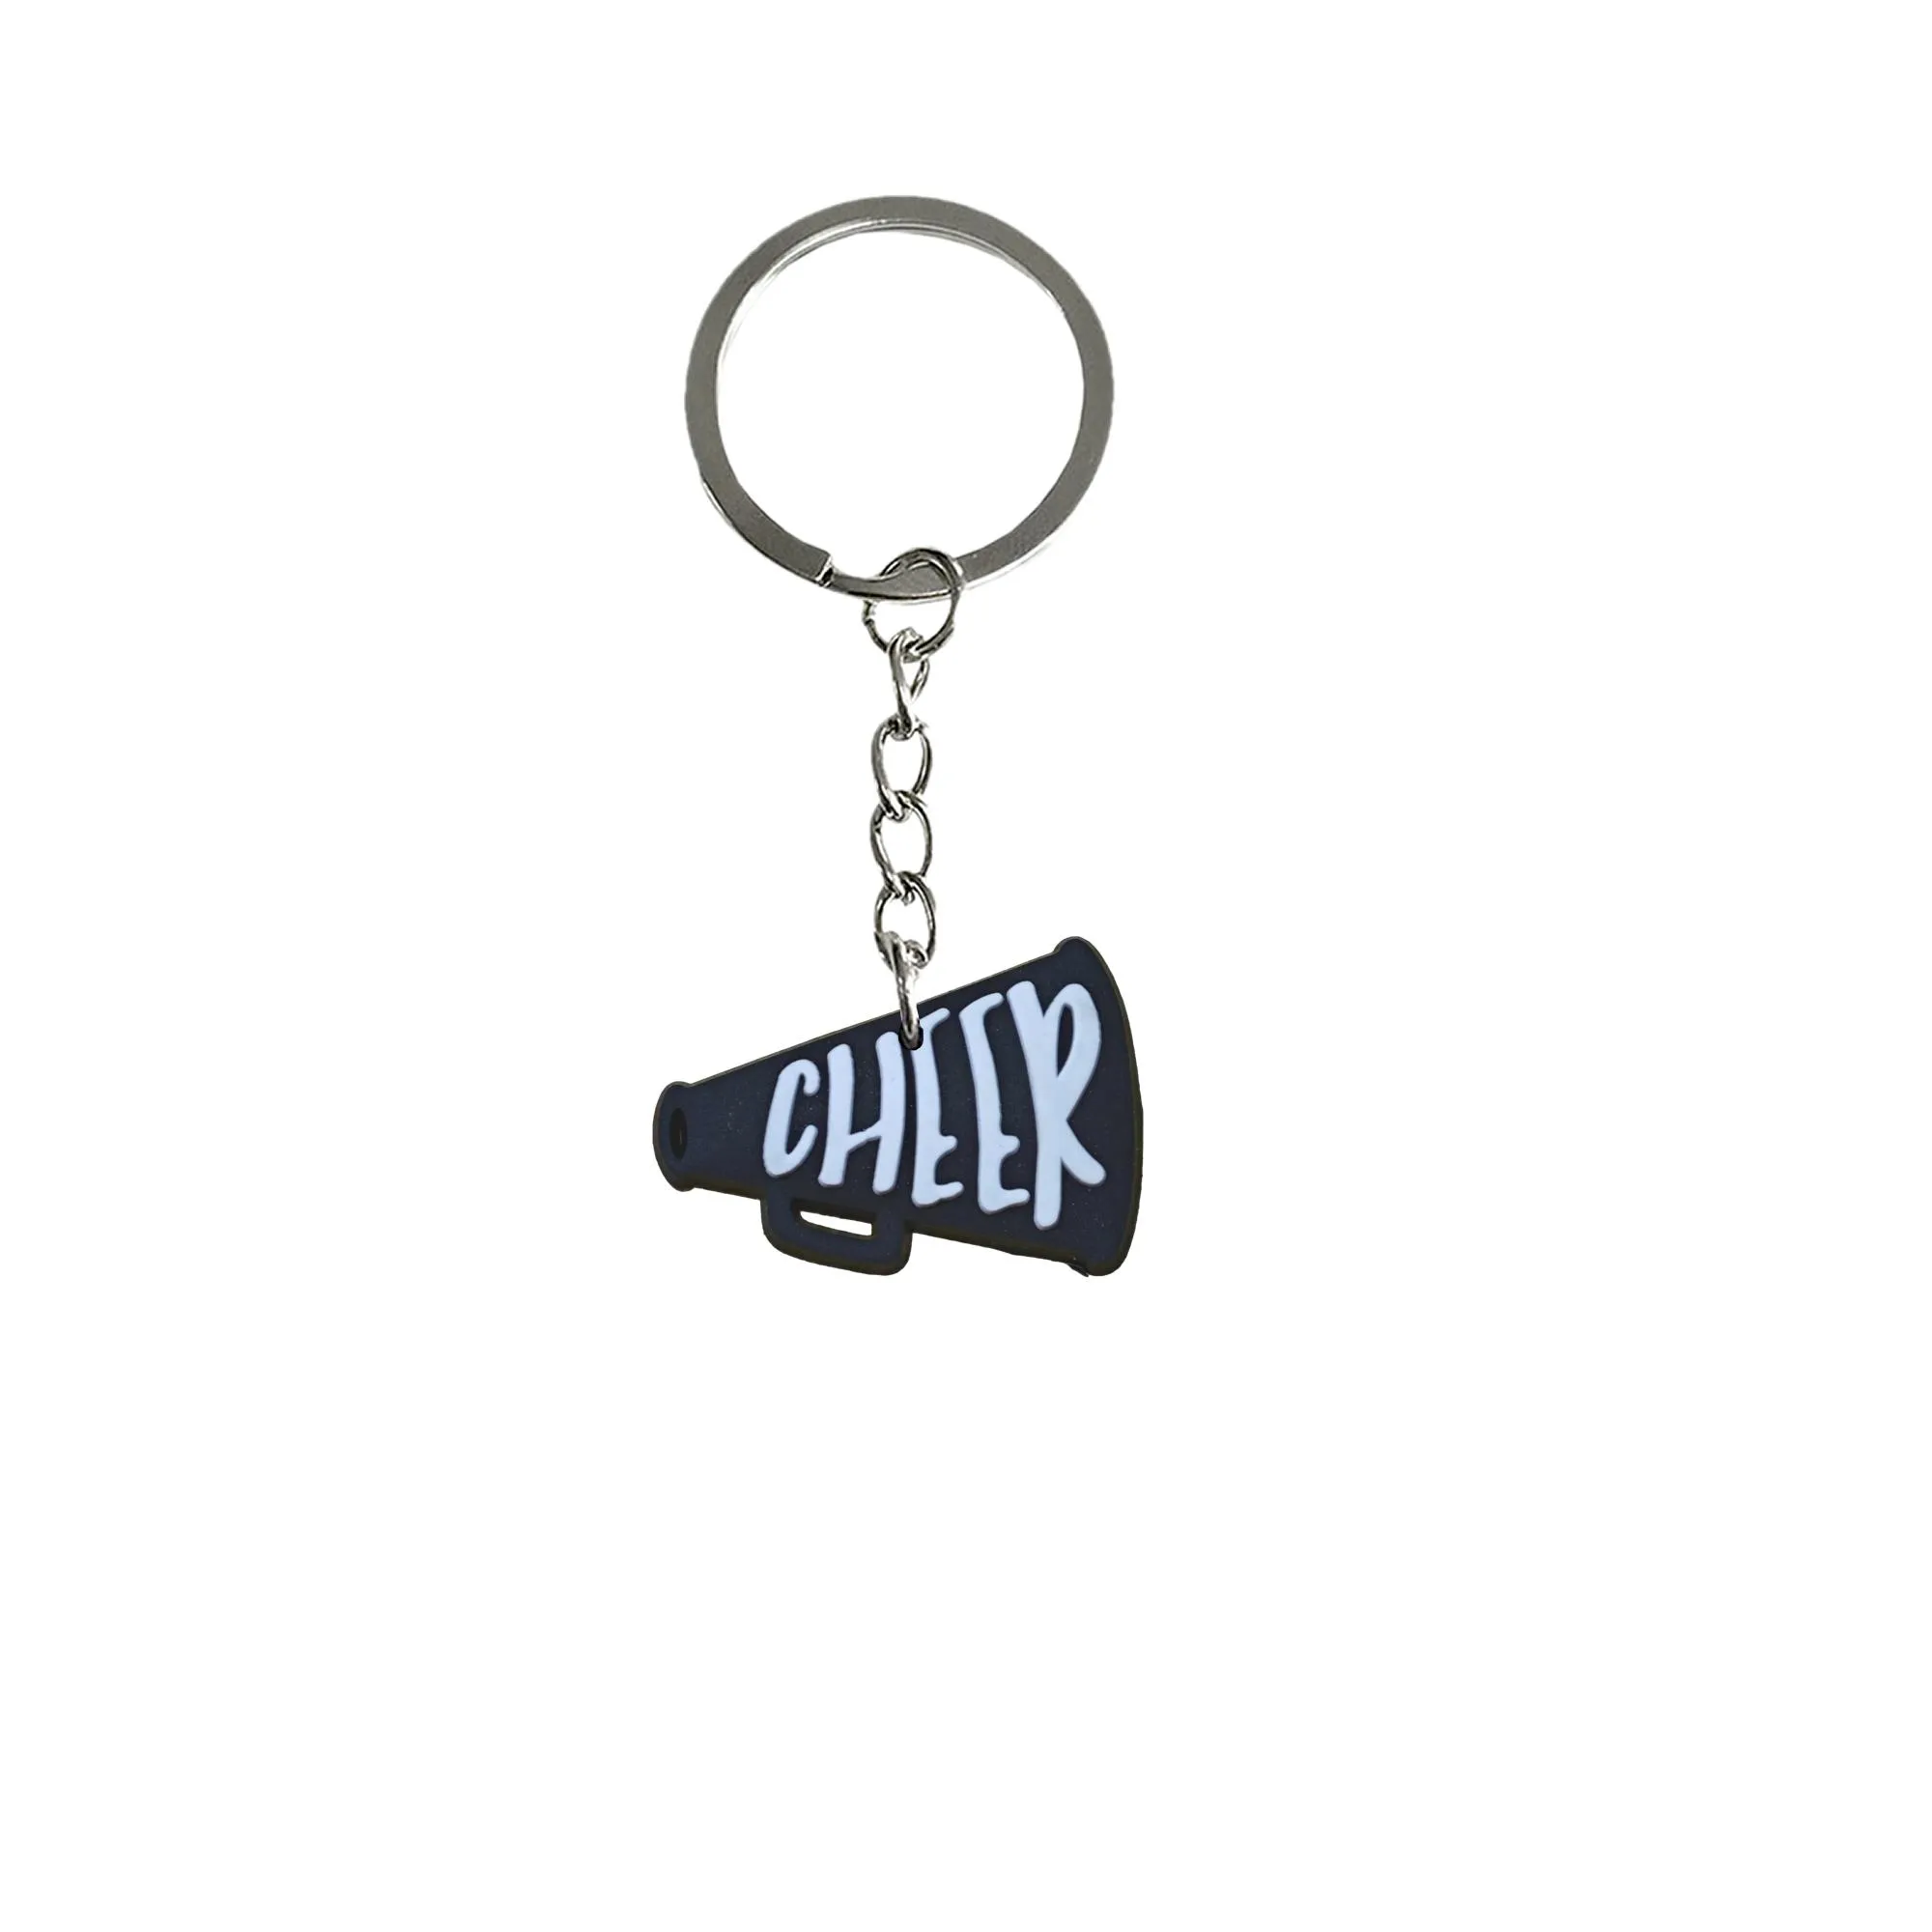 cheer keychain pendants accessories for kids birthday party favors keyring backpacks mini cute classroom prizes suitable schoolbag silicone key chain adult gift keychains women anime cool